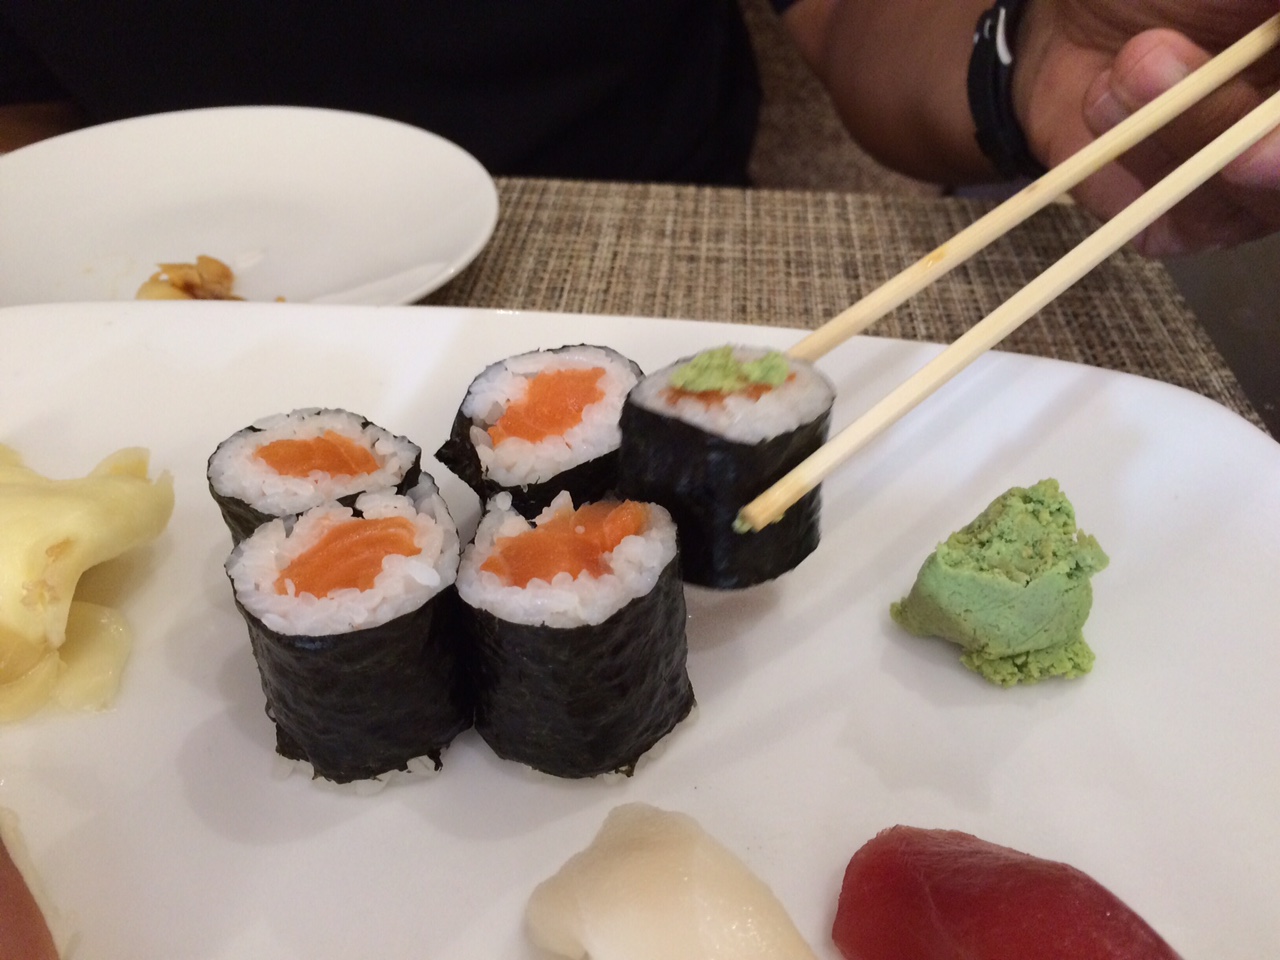 Sushi topper wasabi linked to ‘substantial’ memory boost, study finds